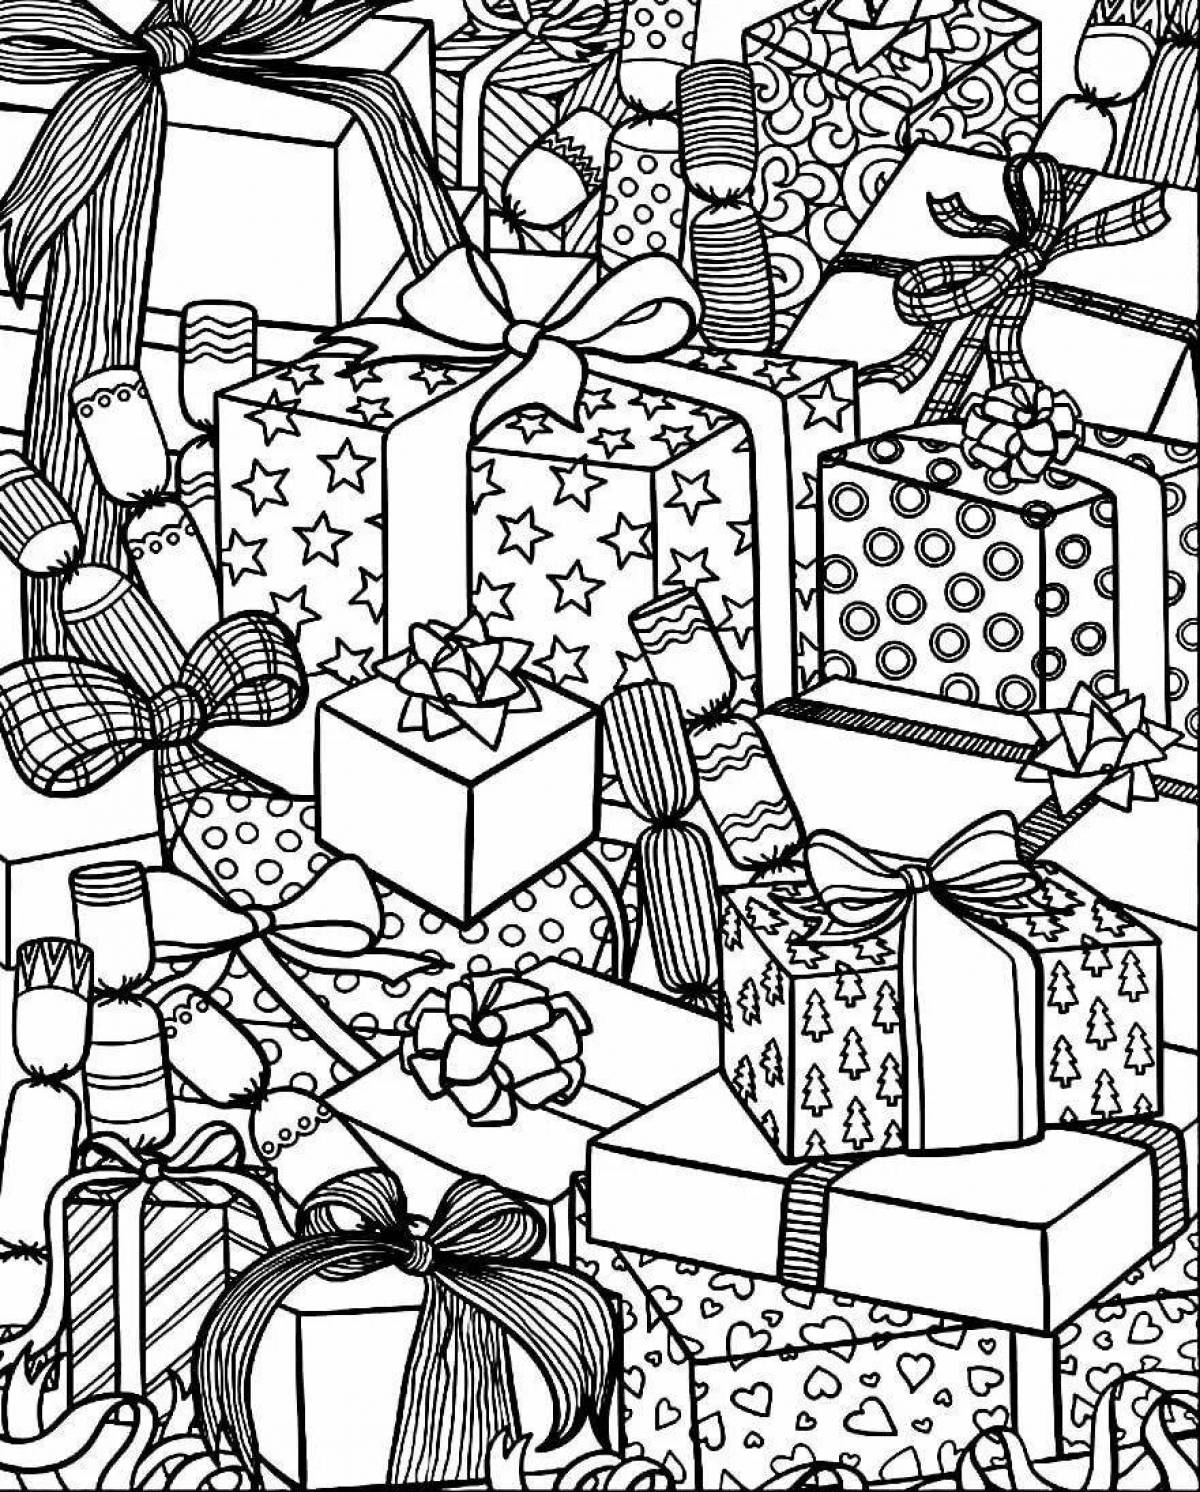 Creative Christmas coloring book for adults